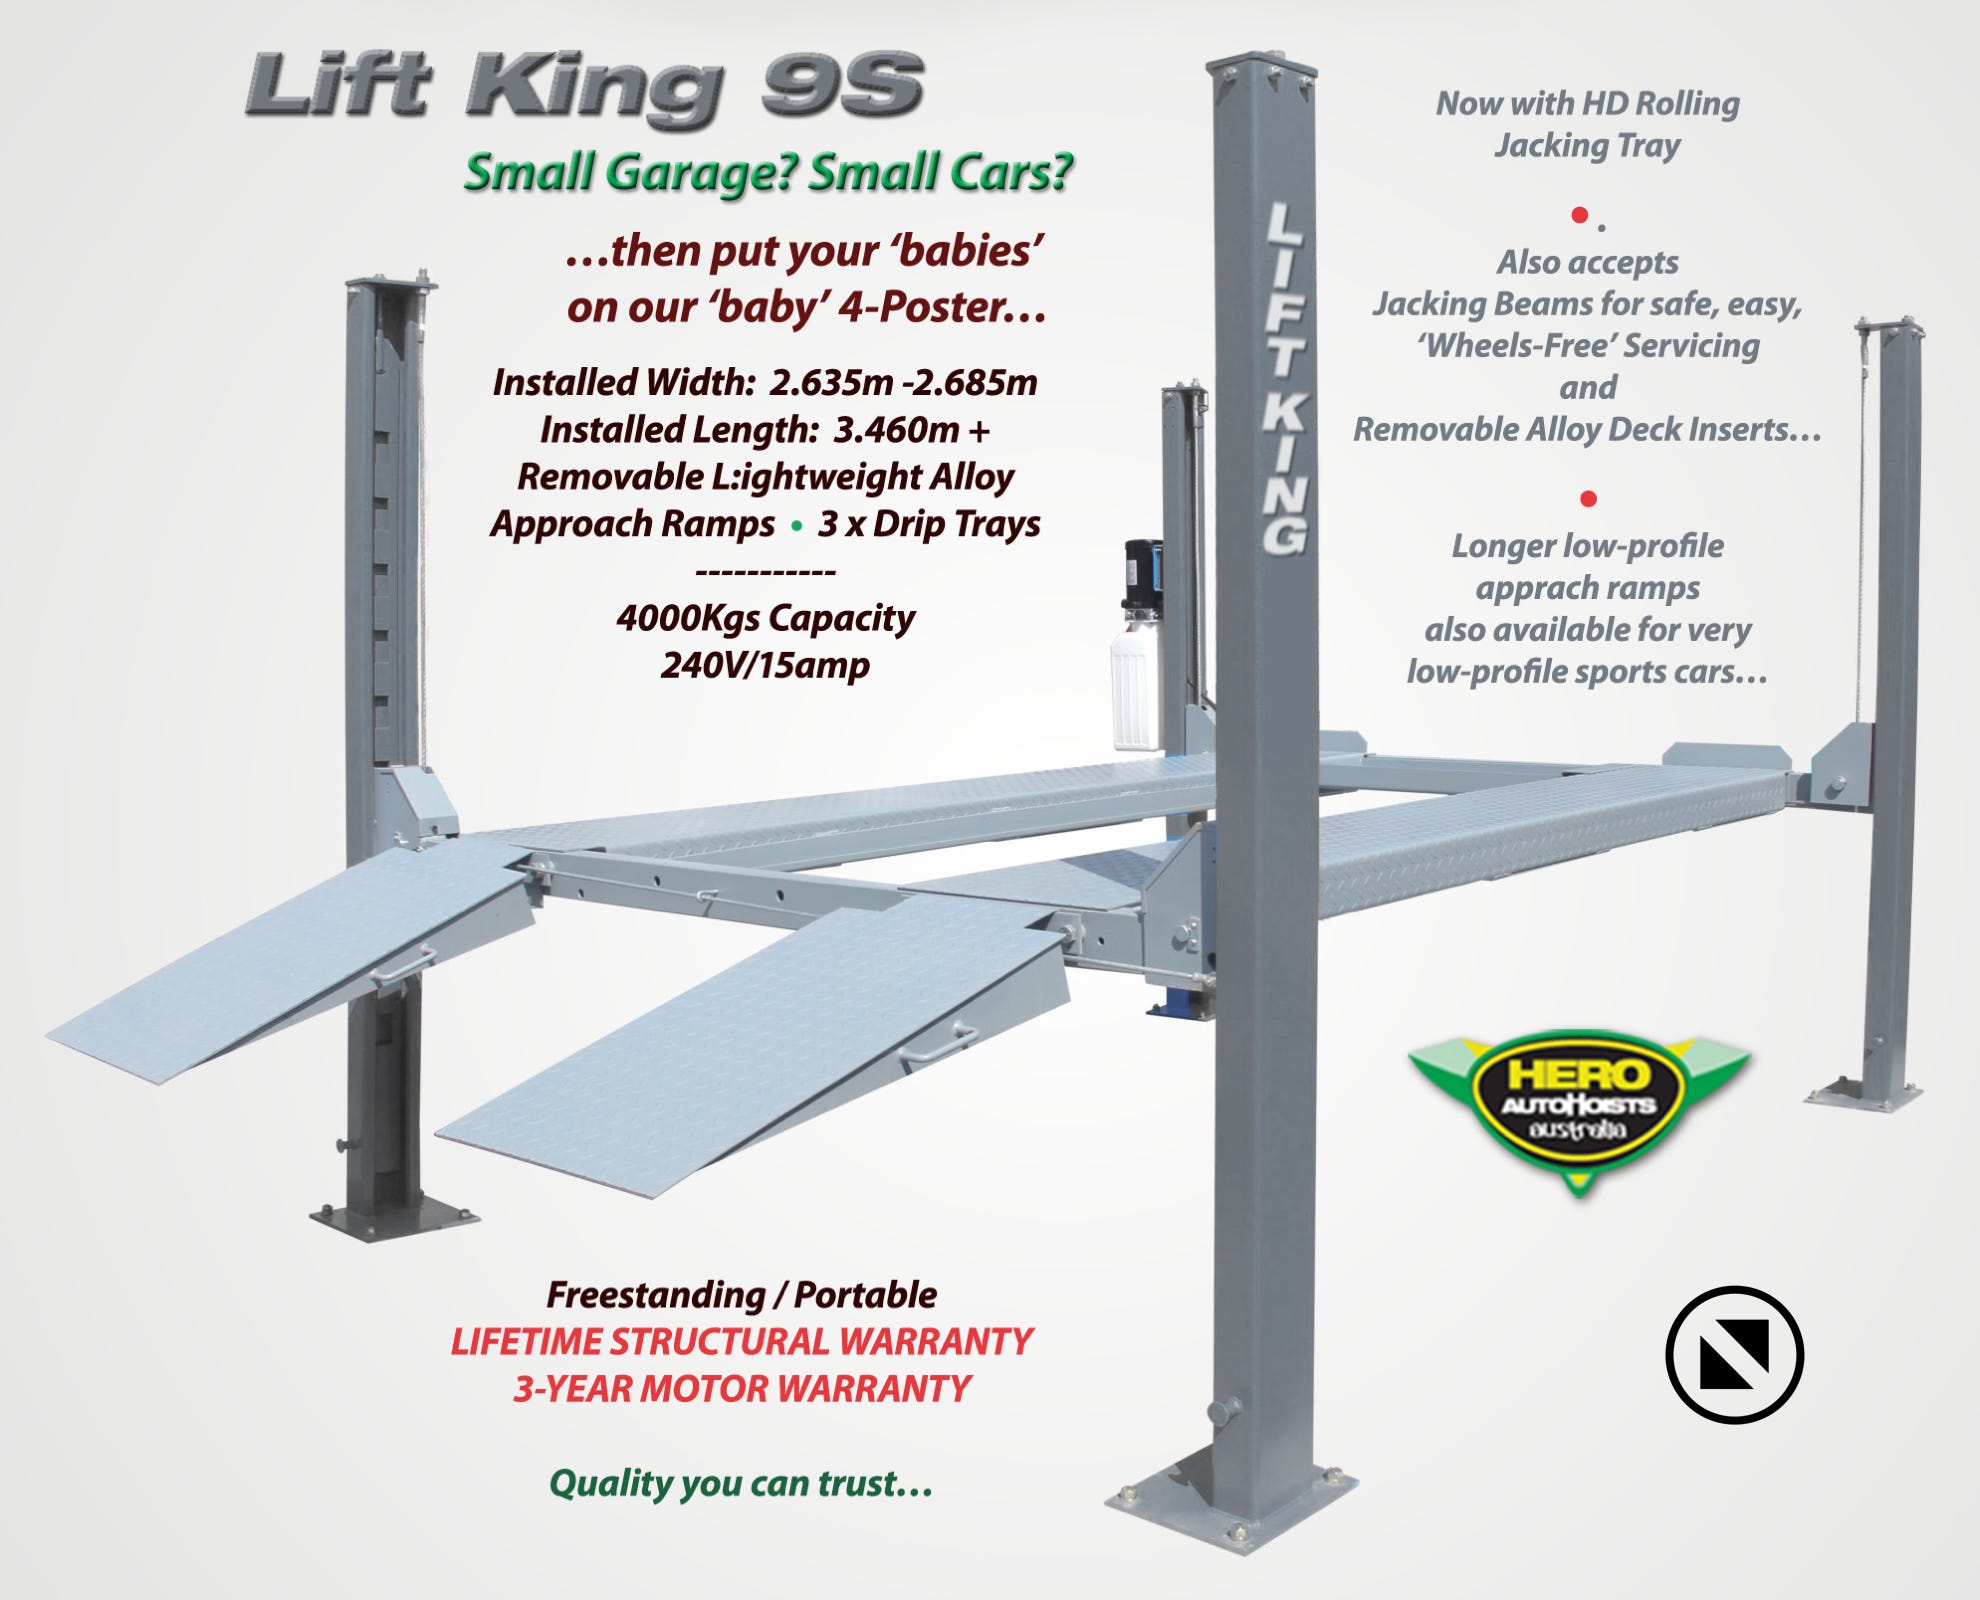 Lift King 9S - great for small spaces and average to compact size cars...